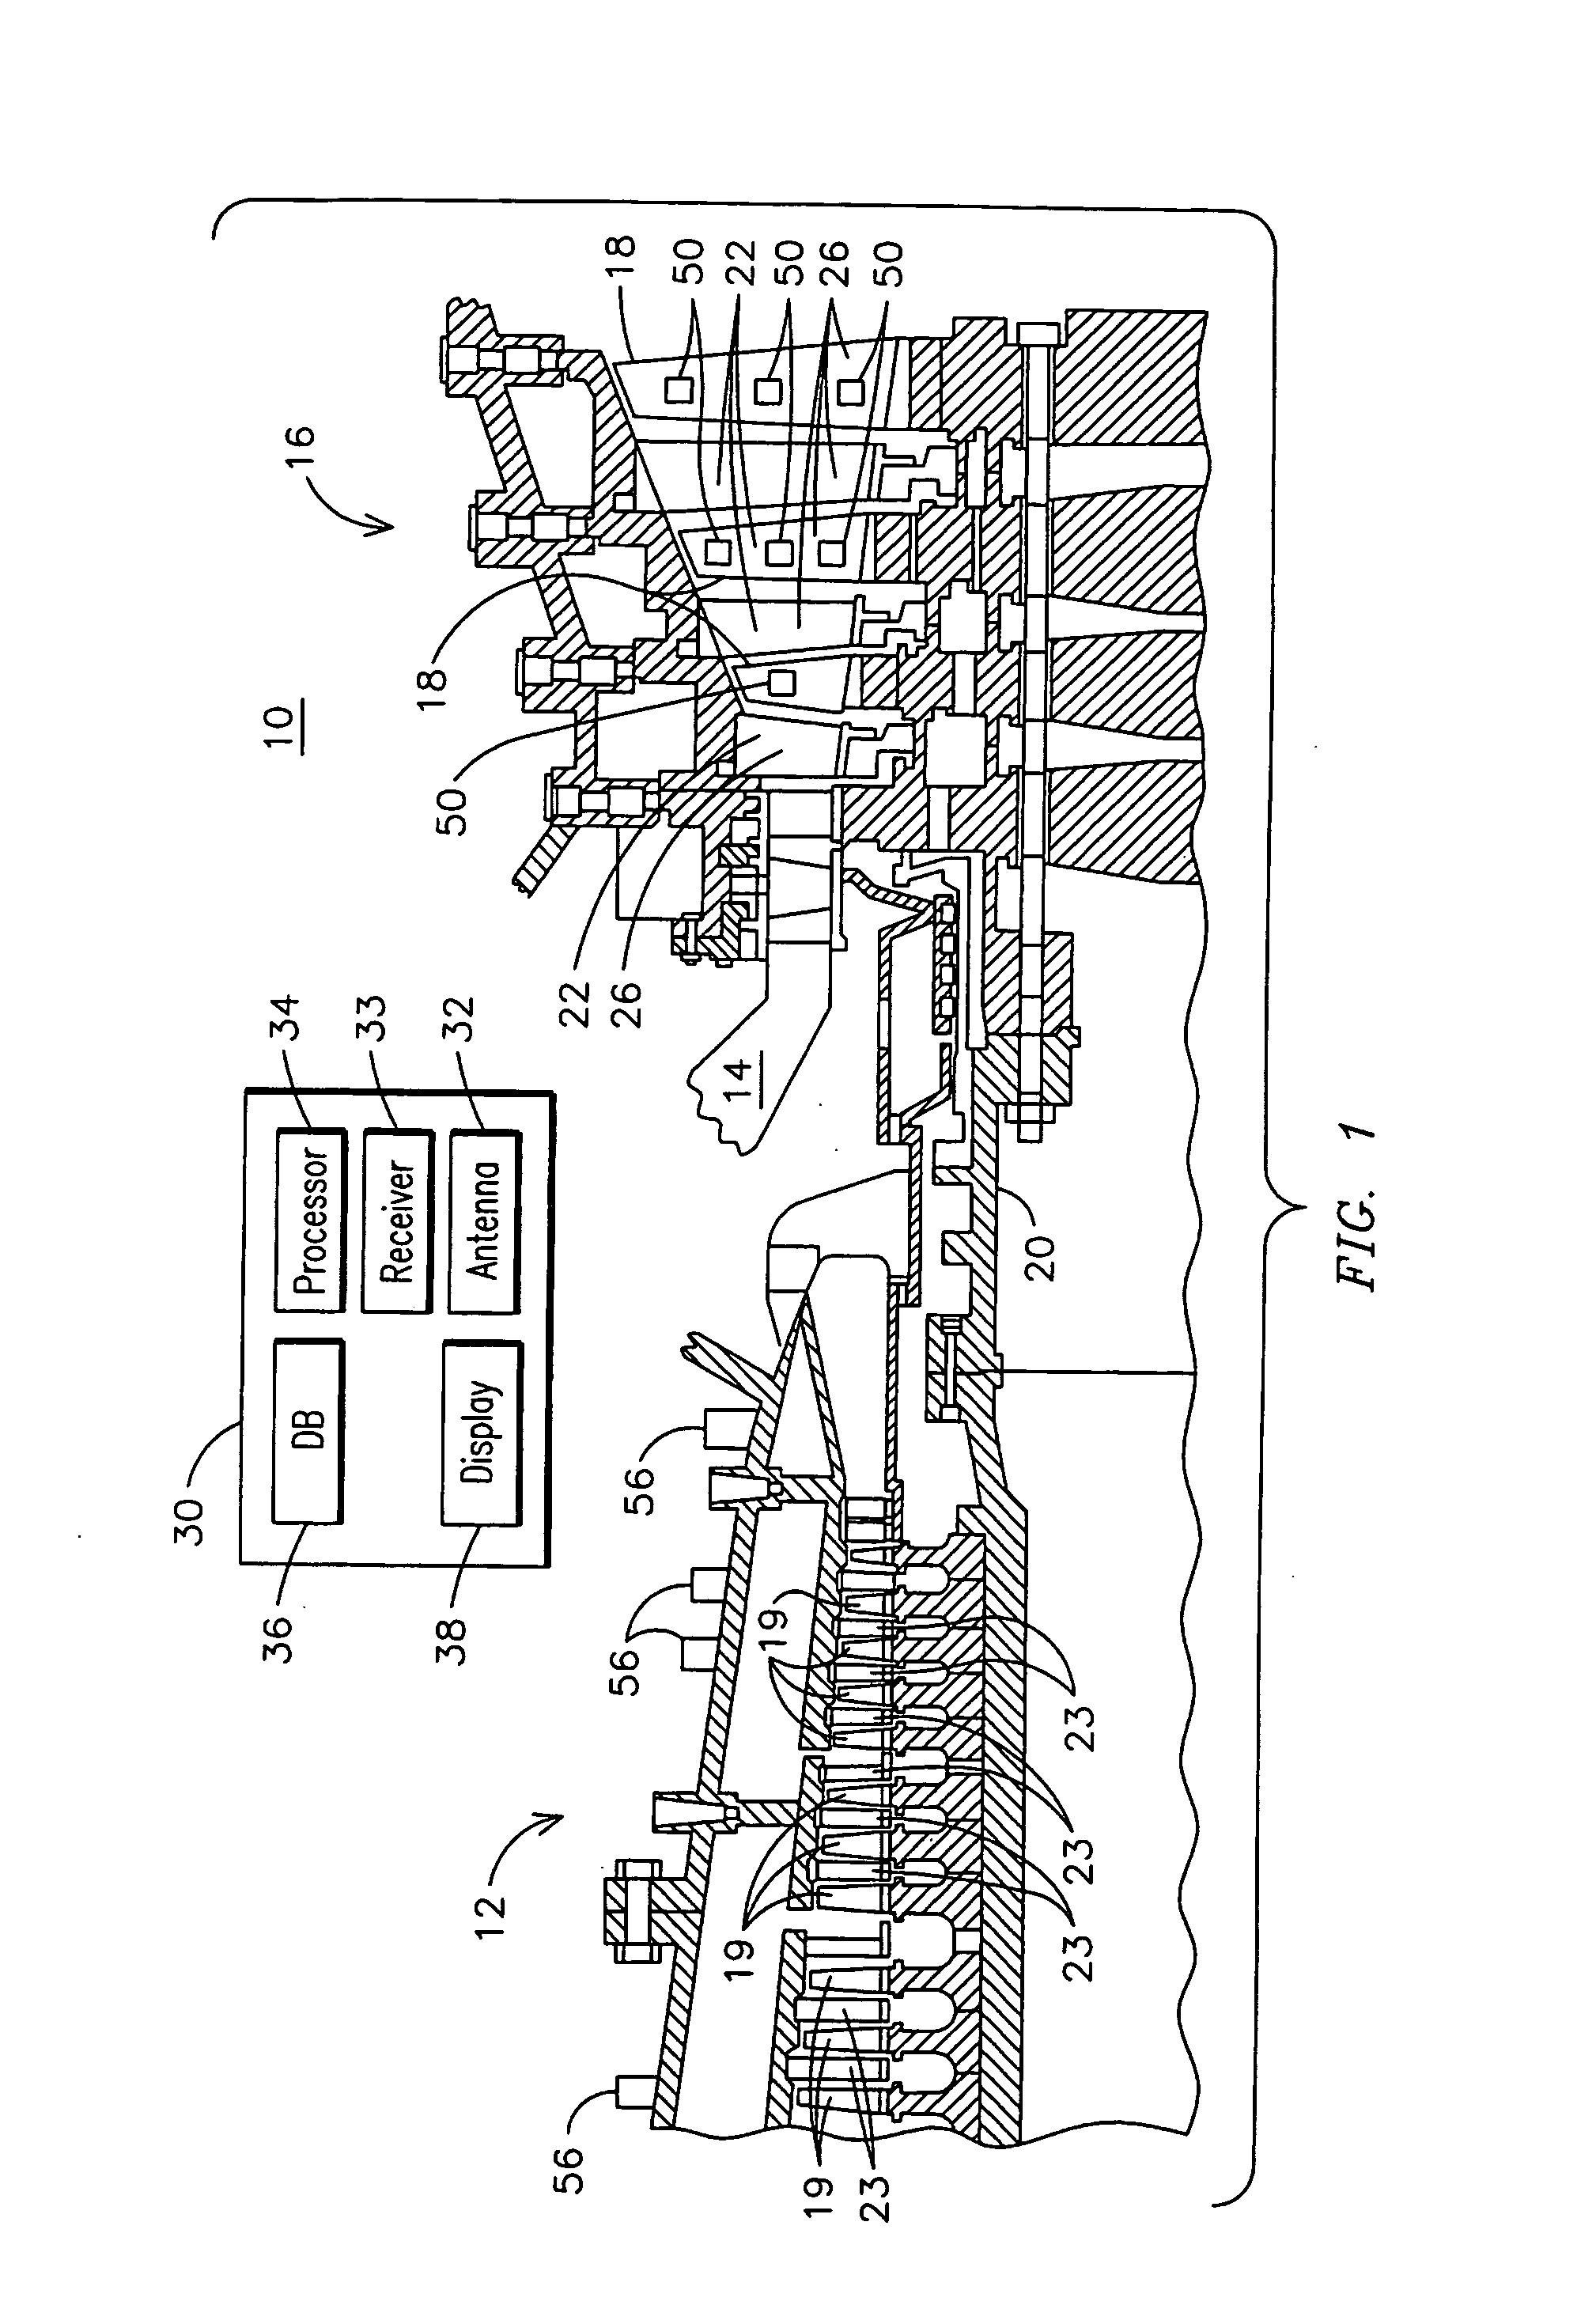 Instrumented component for use in an operating environment